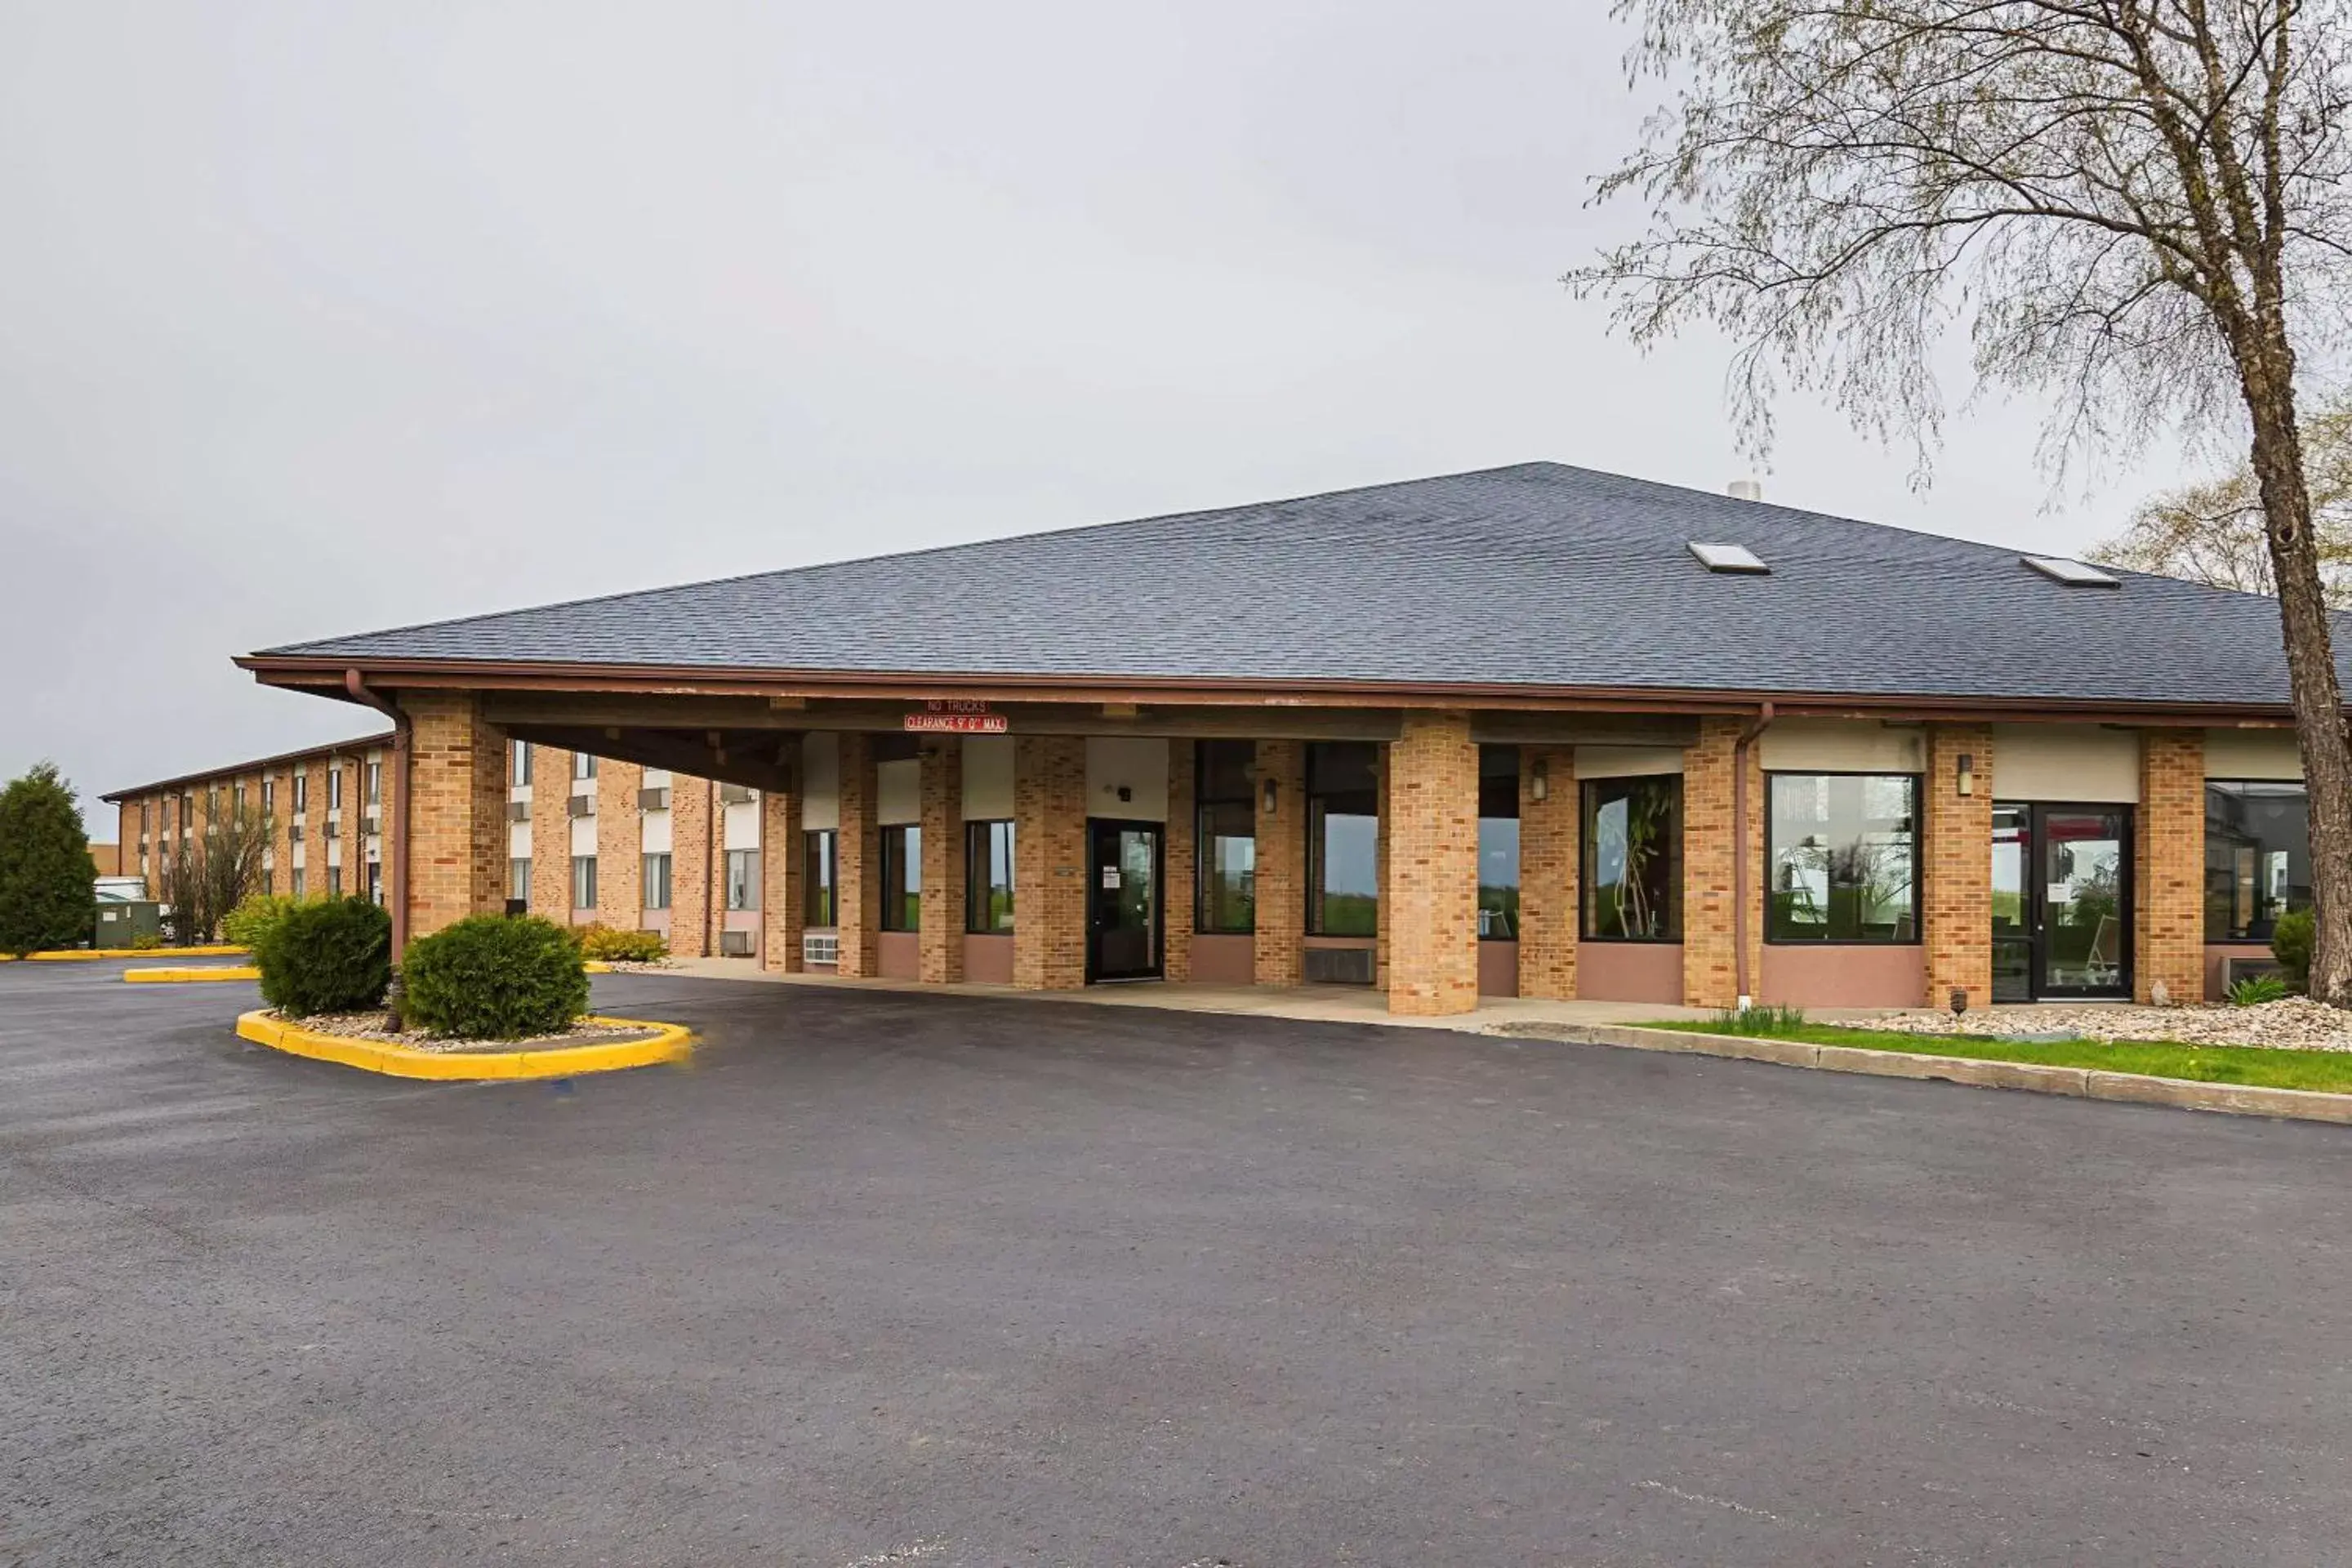 Property building in Quality Inn Waverly